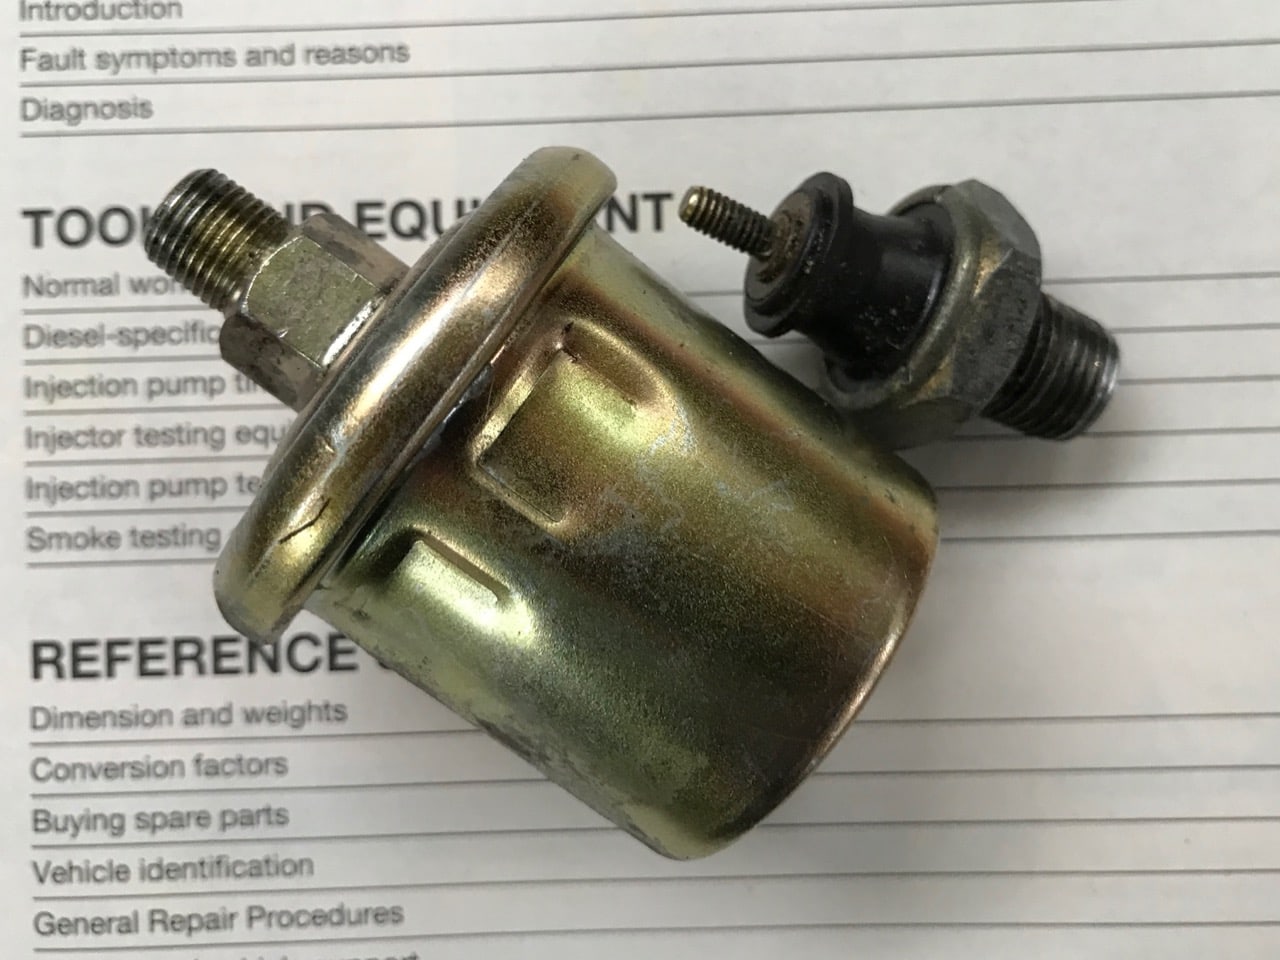 2 Oil Pressure senders removed from the engine.